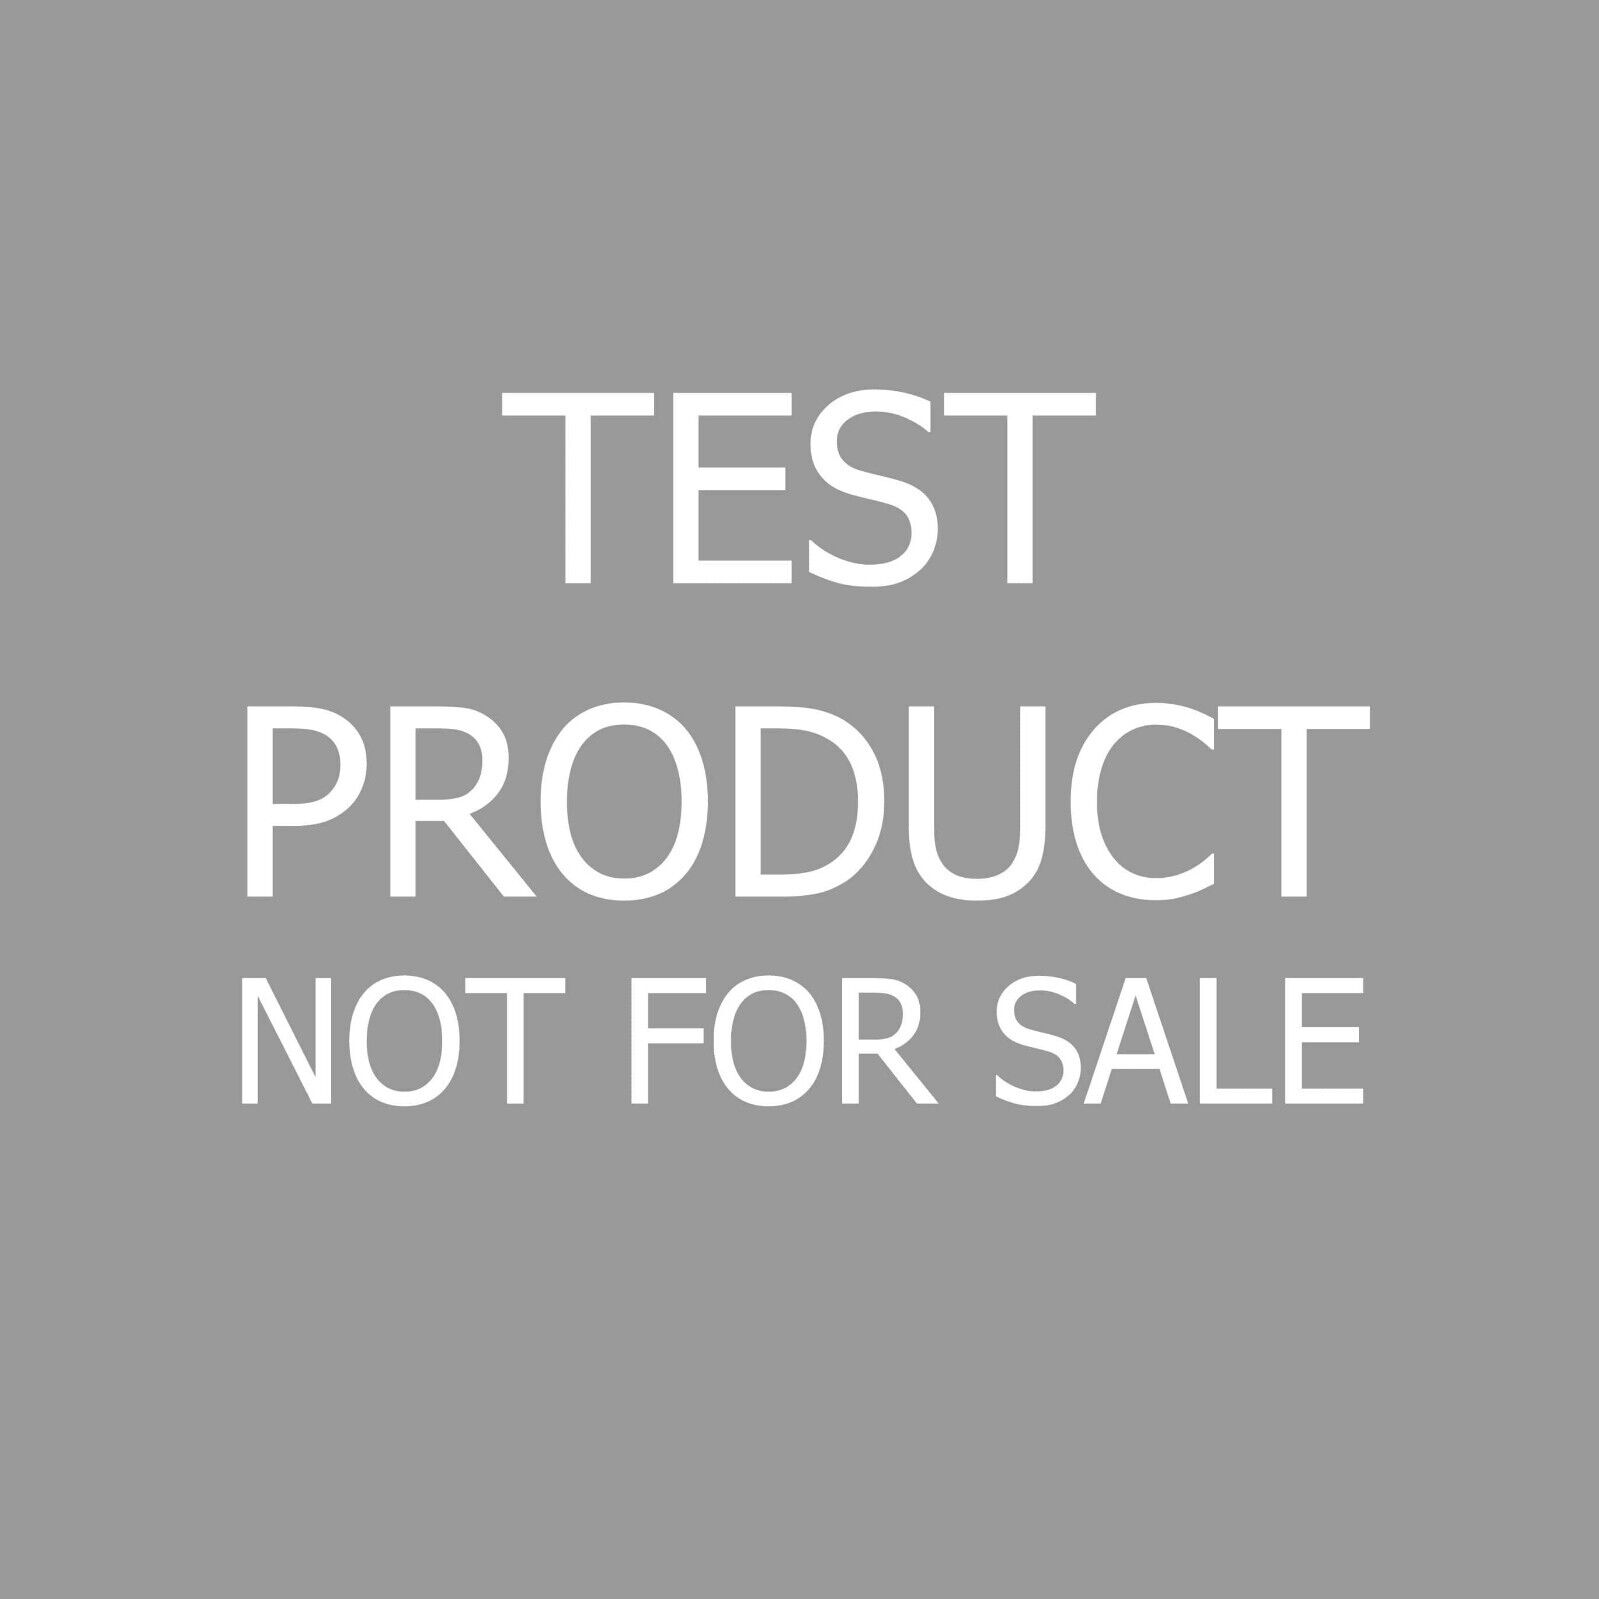 Test Product - Not for Sale 1041